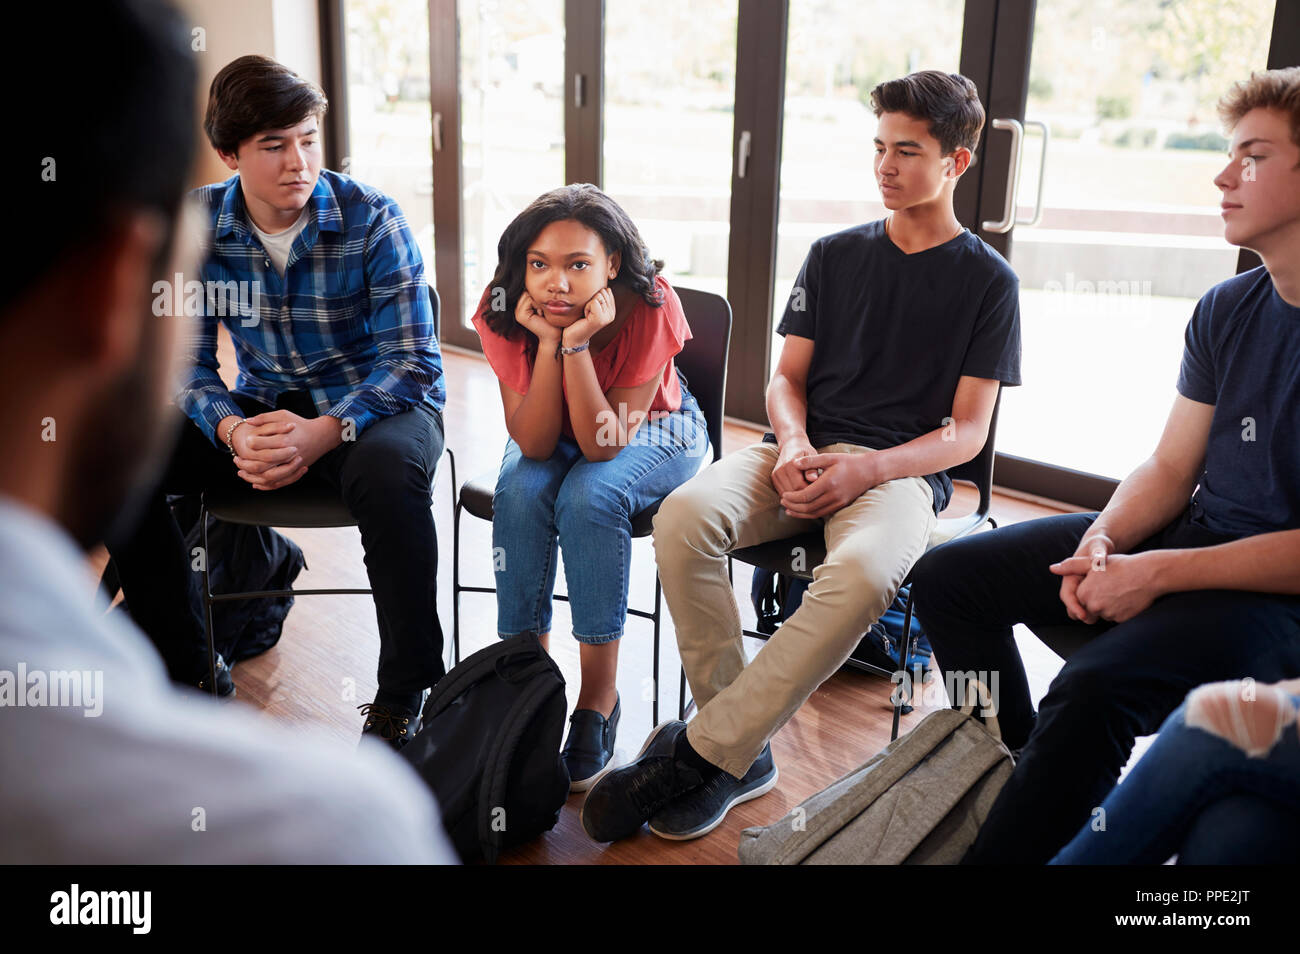 Unhappy Female Pupil In High School Discussion Group Stock Photo